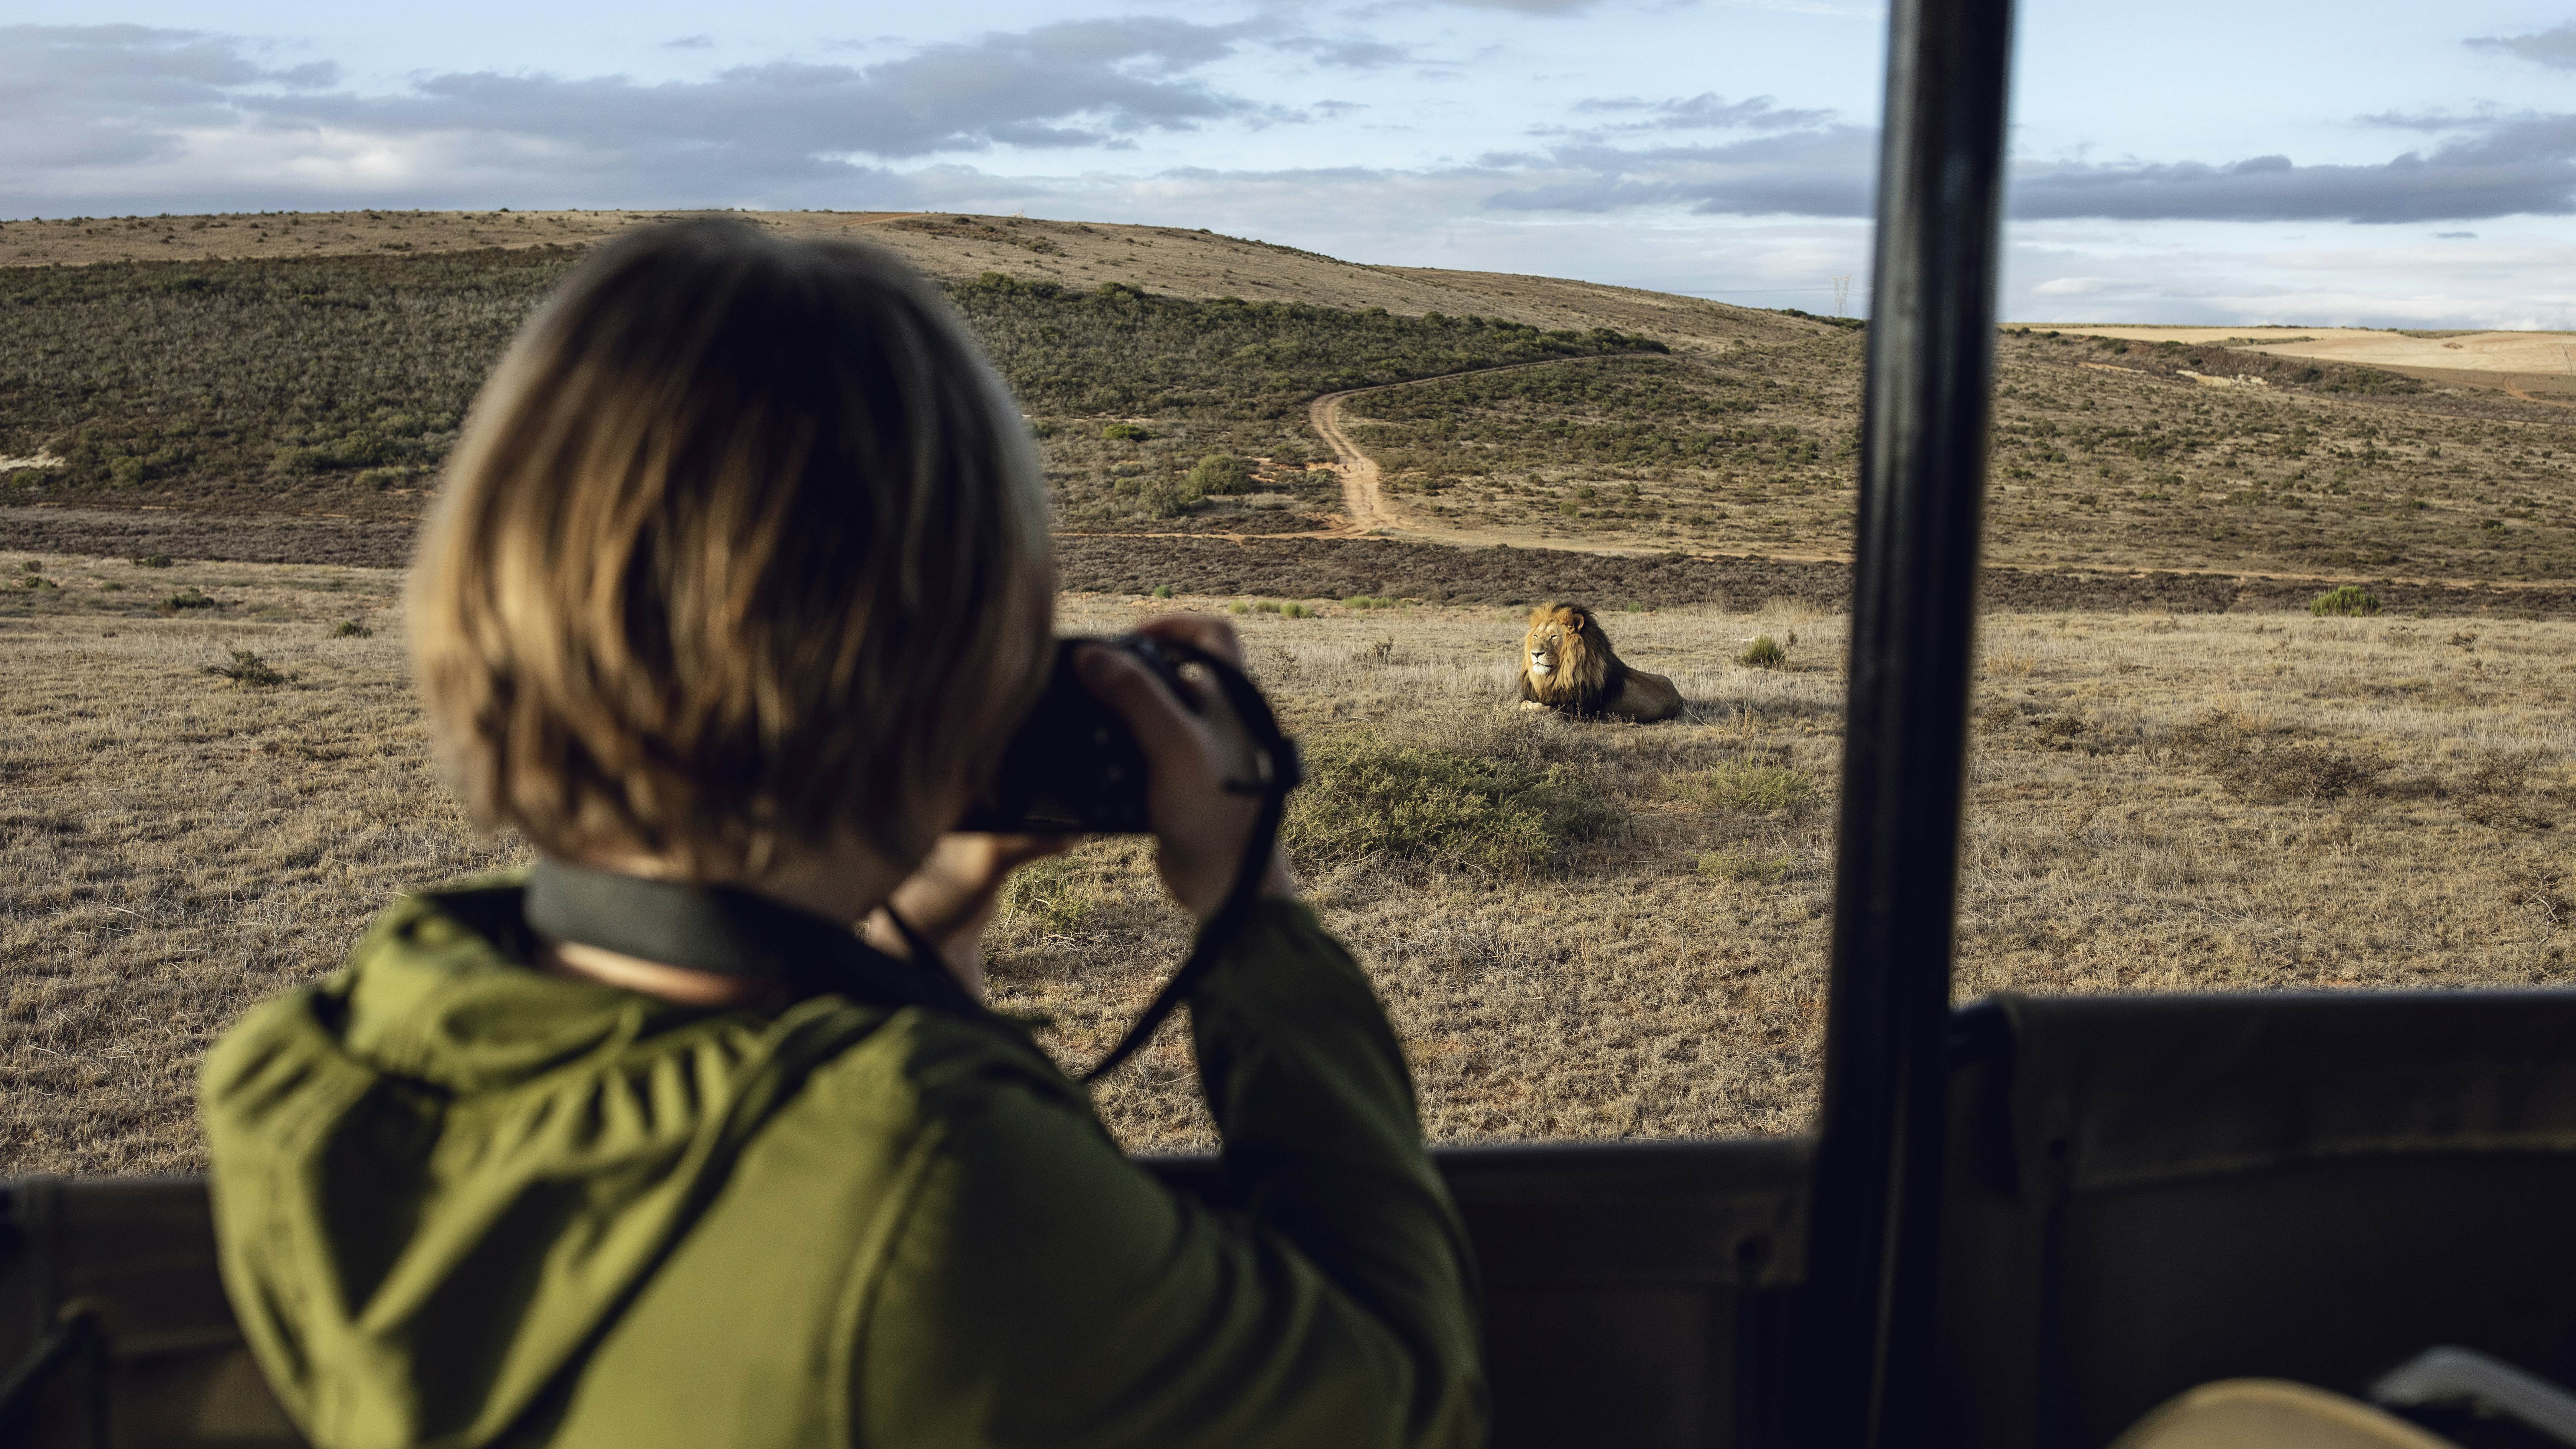 A young girl photographing a lion at Inverdoorn game Reserve in Breede River DC.